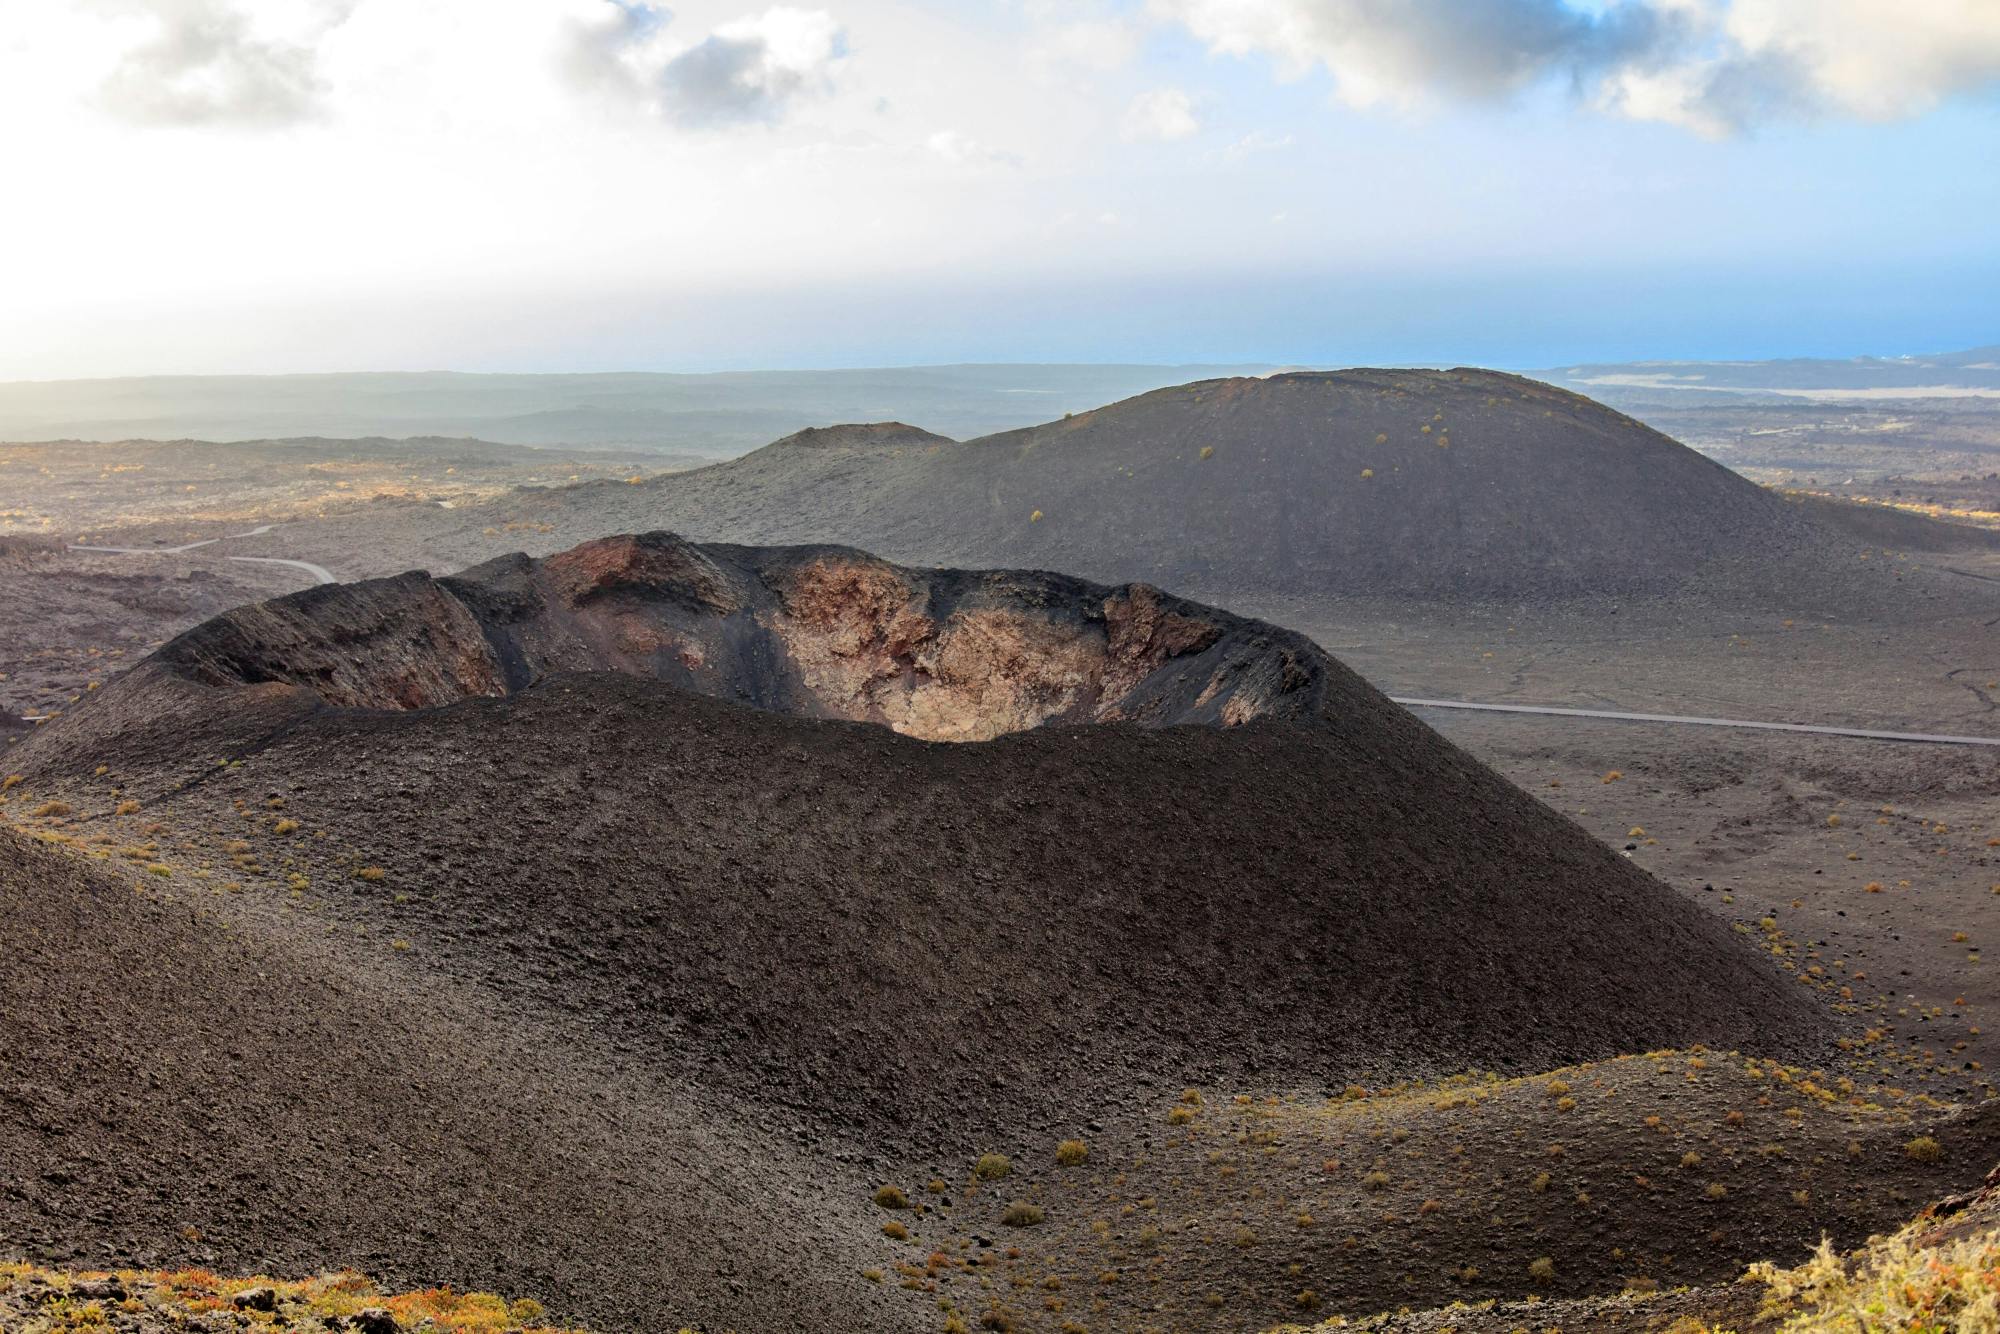 Highlights of Lanzarote Private Tour